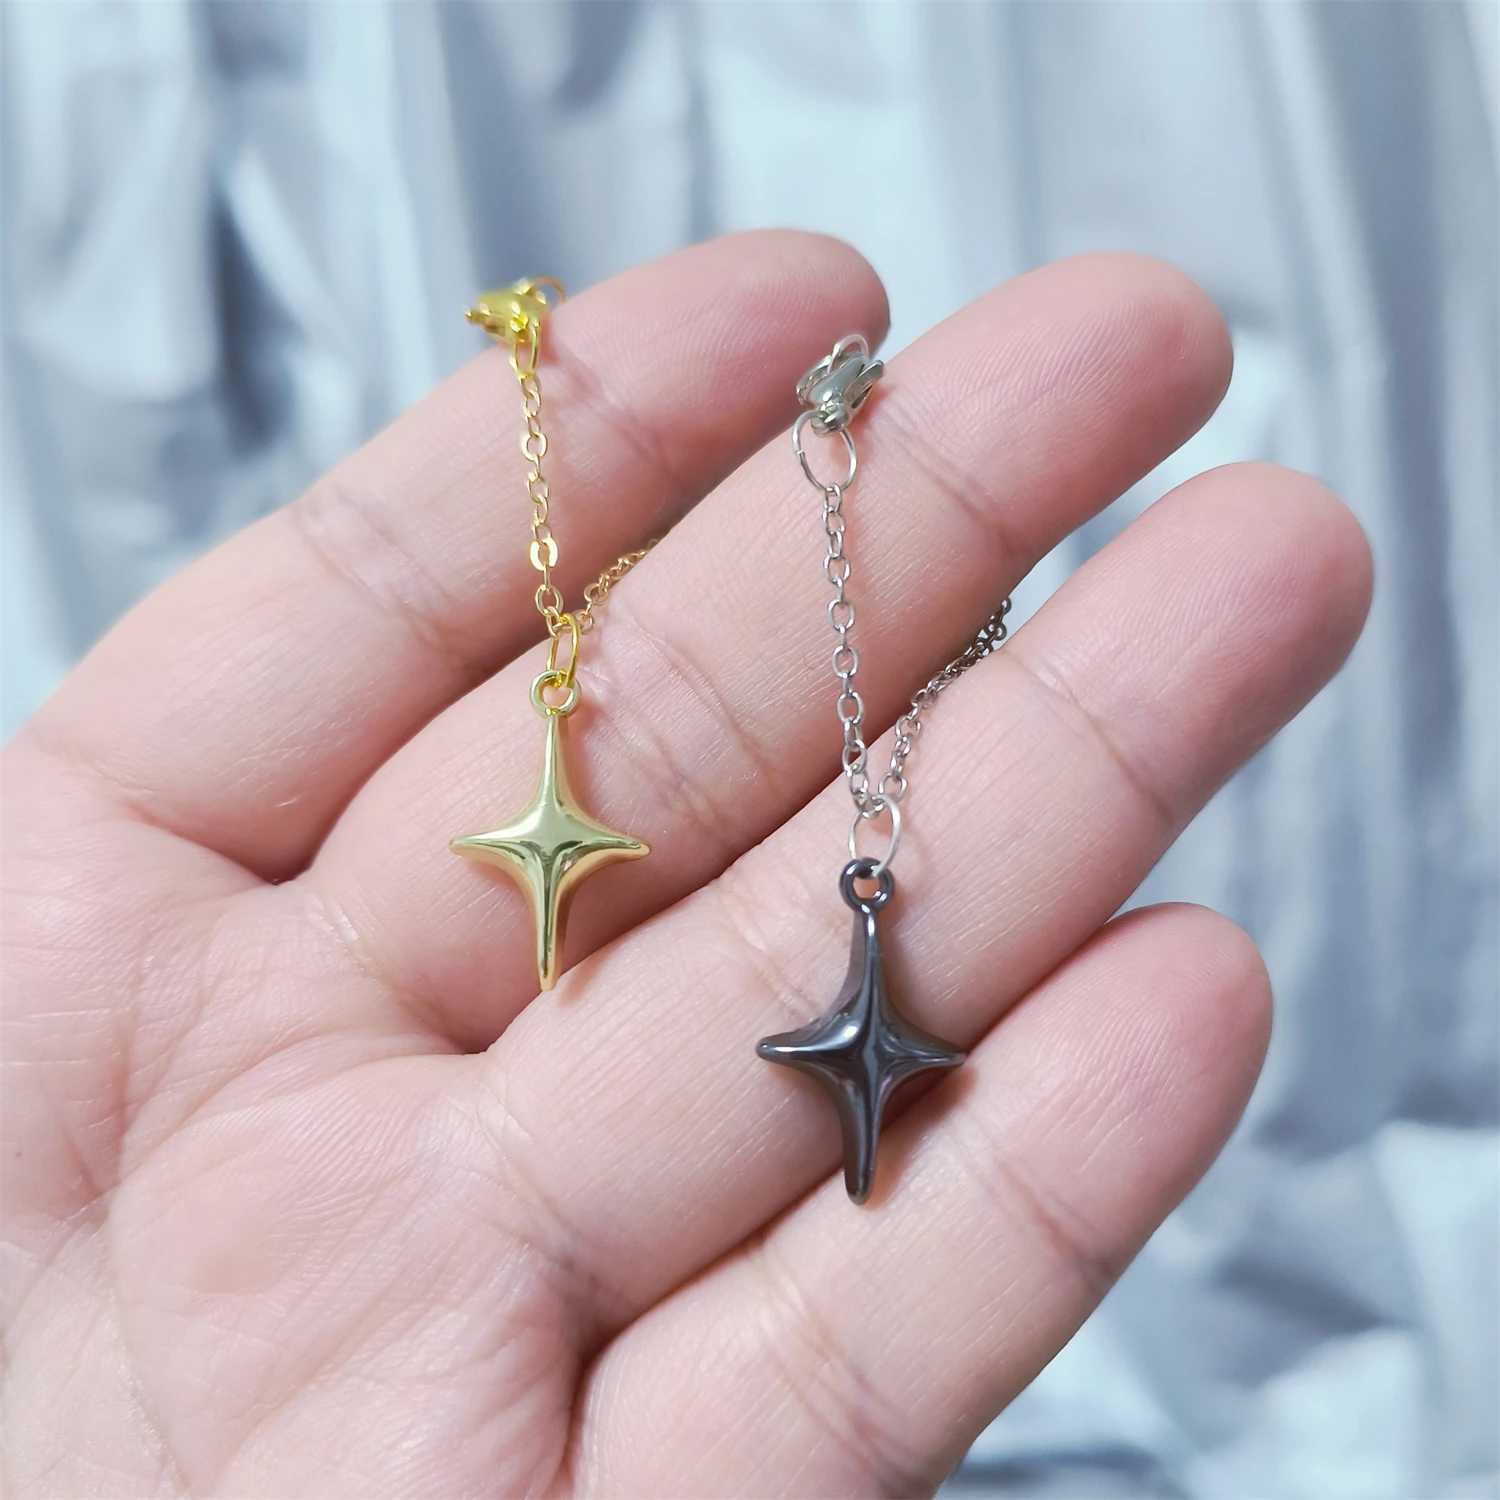 For BJD 1/6 Scale Blyth OB Doll Size Simulation Big Star Necklace Mini Tiny Accessories Decoration Alloy Prop Fashion western star 4700 sf tandem truck tractor 1 50 scale by diecast masters 71036